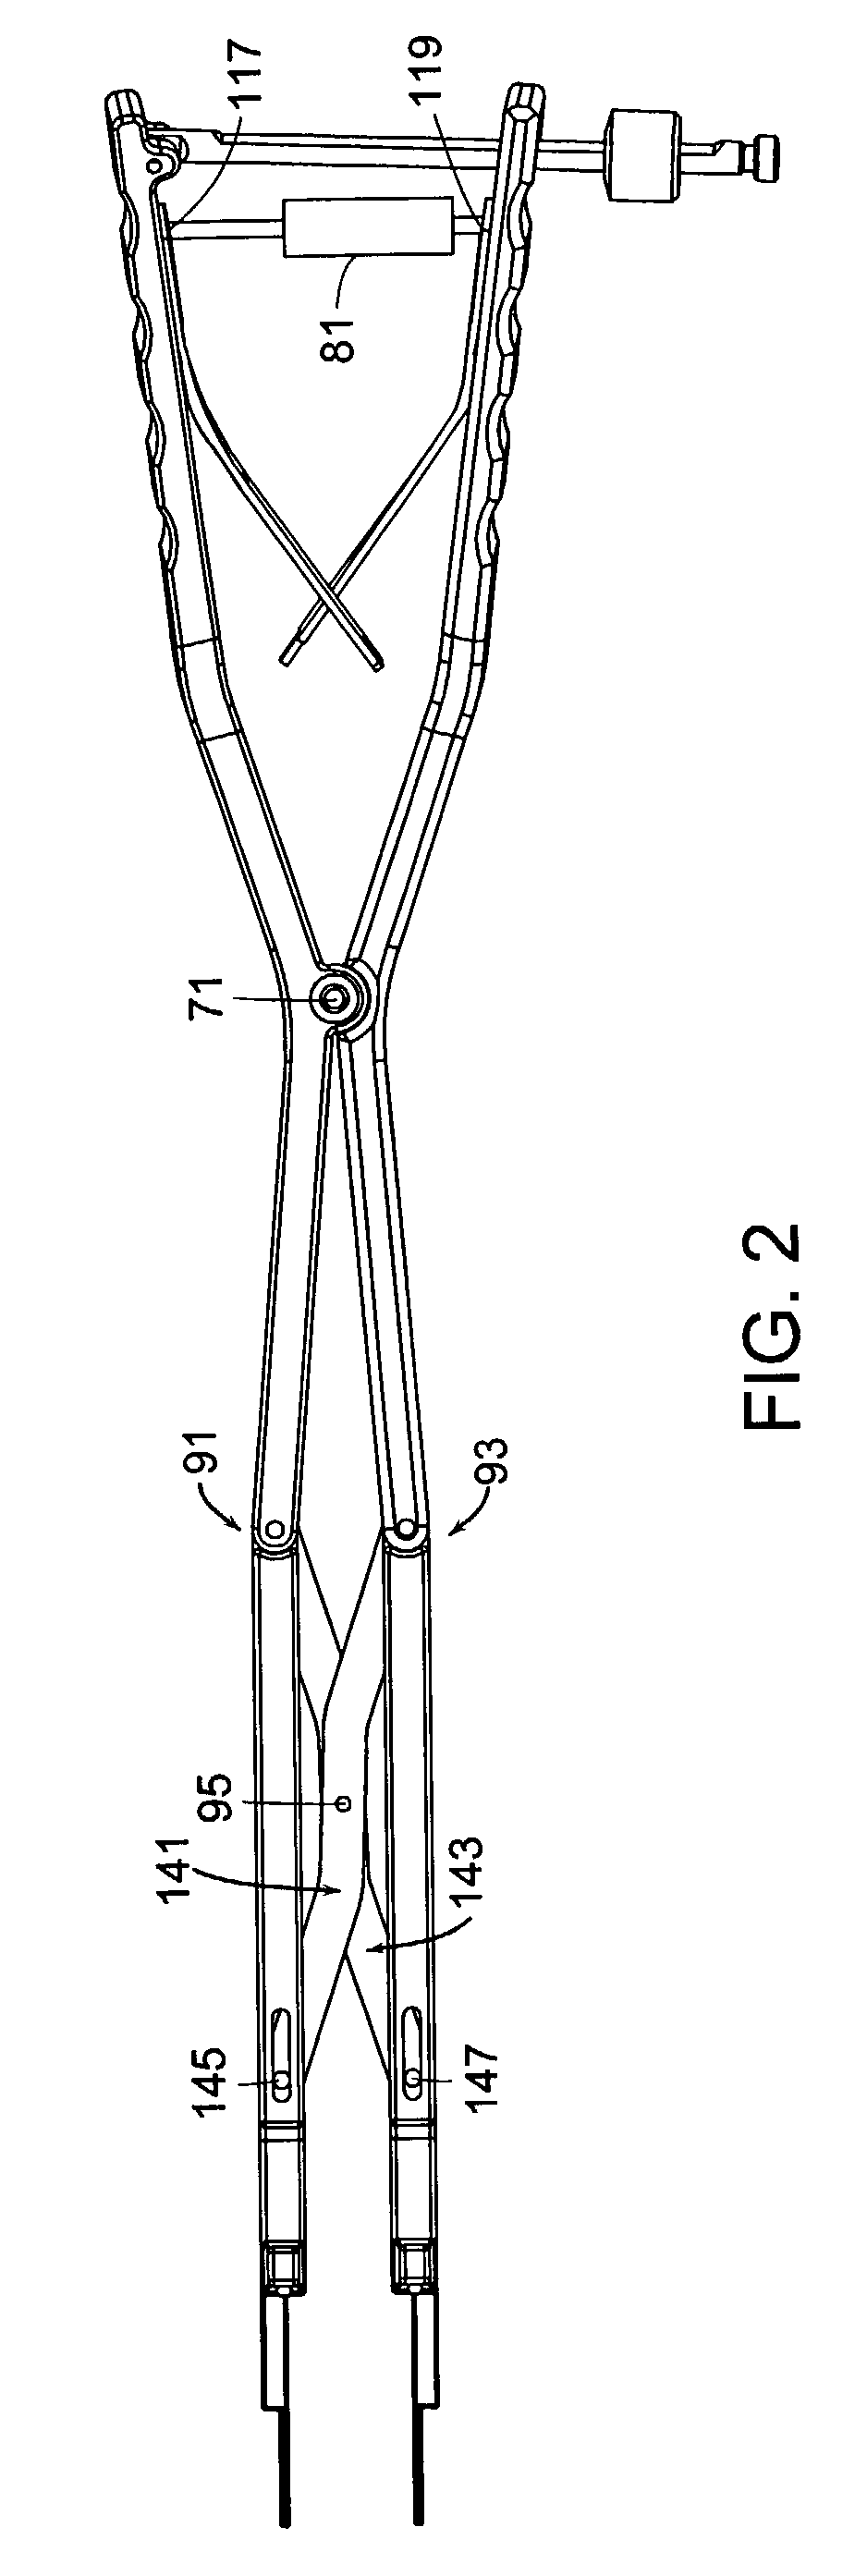 Pivoted tensiometer for measuring tension in an intervertebral disc space